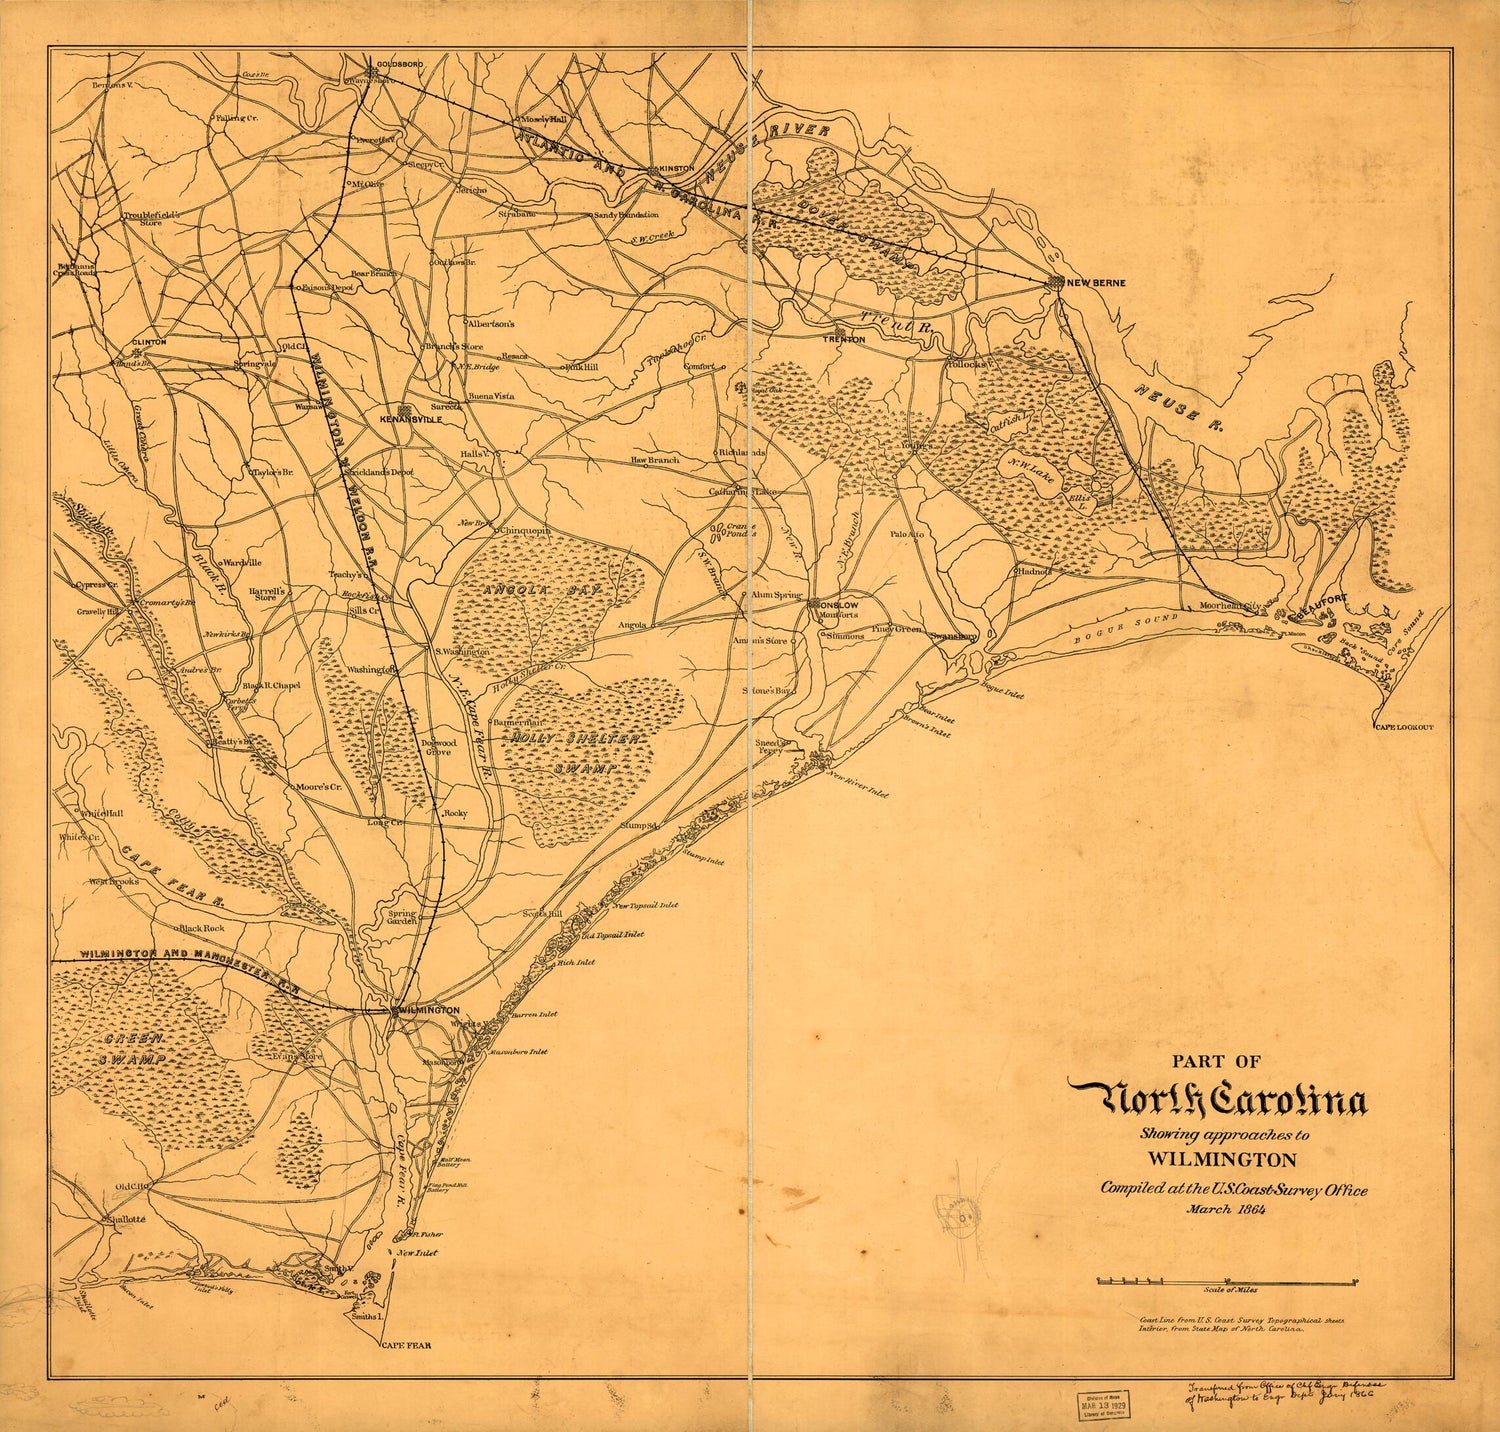 This old map of Part of North Carolina Showing Approaches to Wilmington from 1864 was created by  United States Coast Survey in 1864